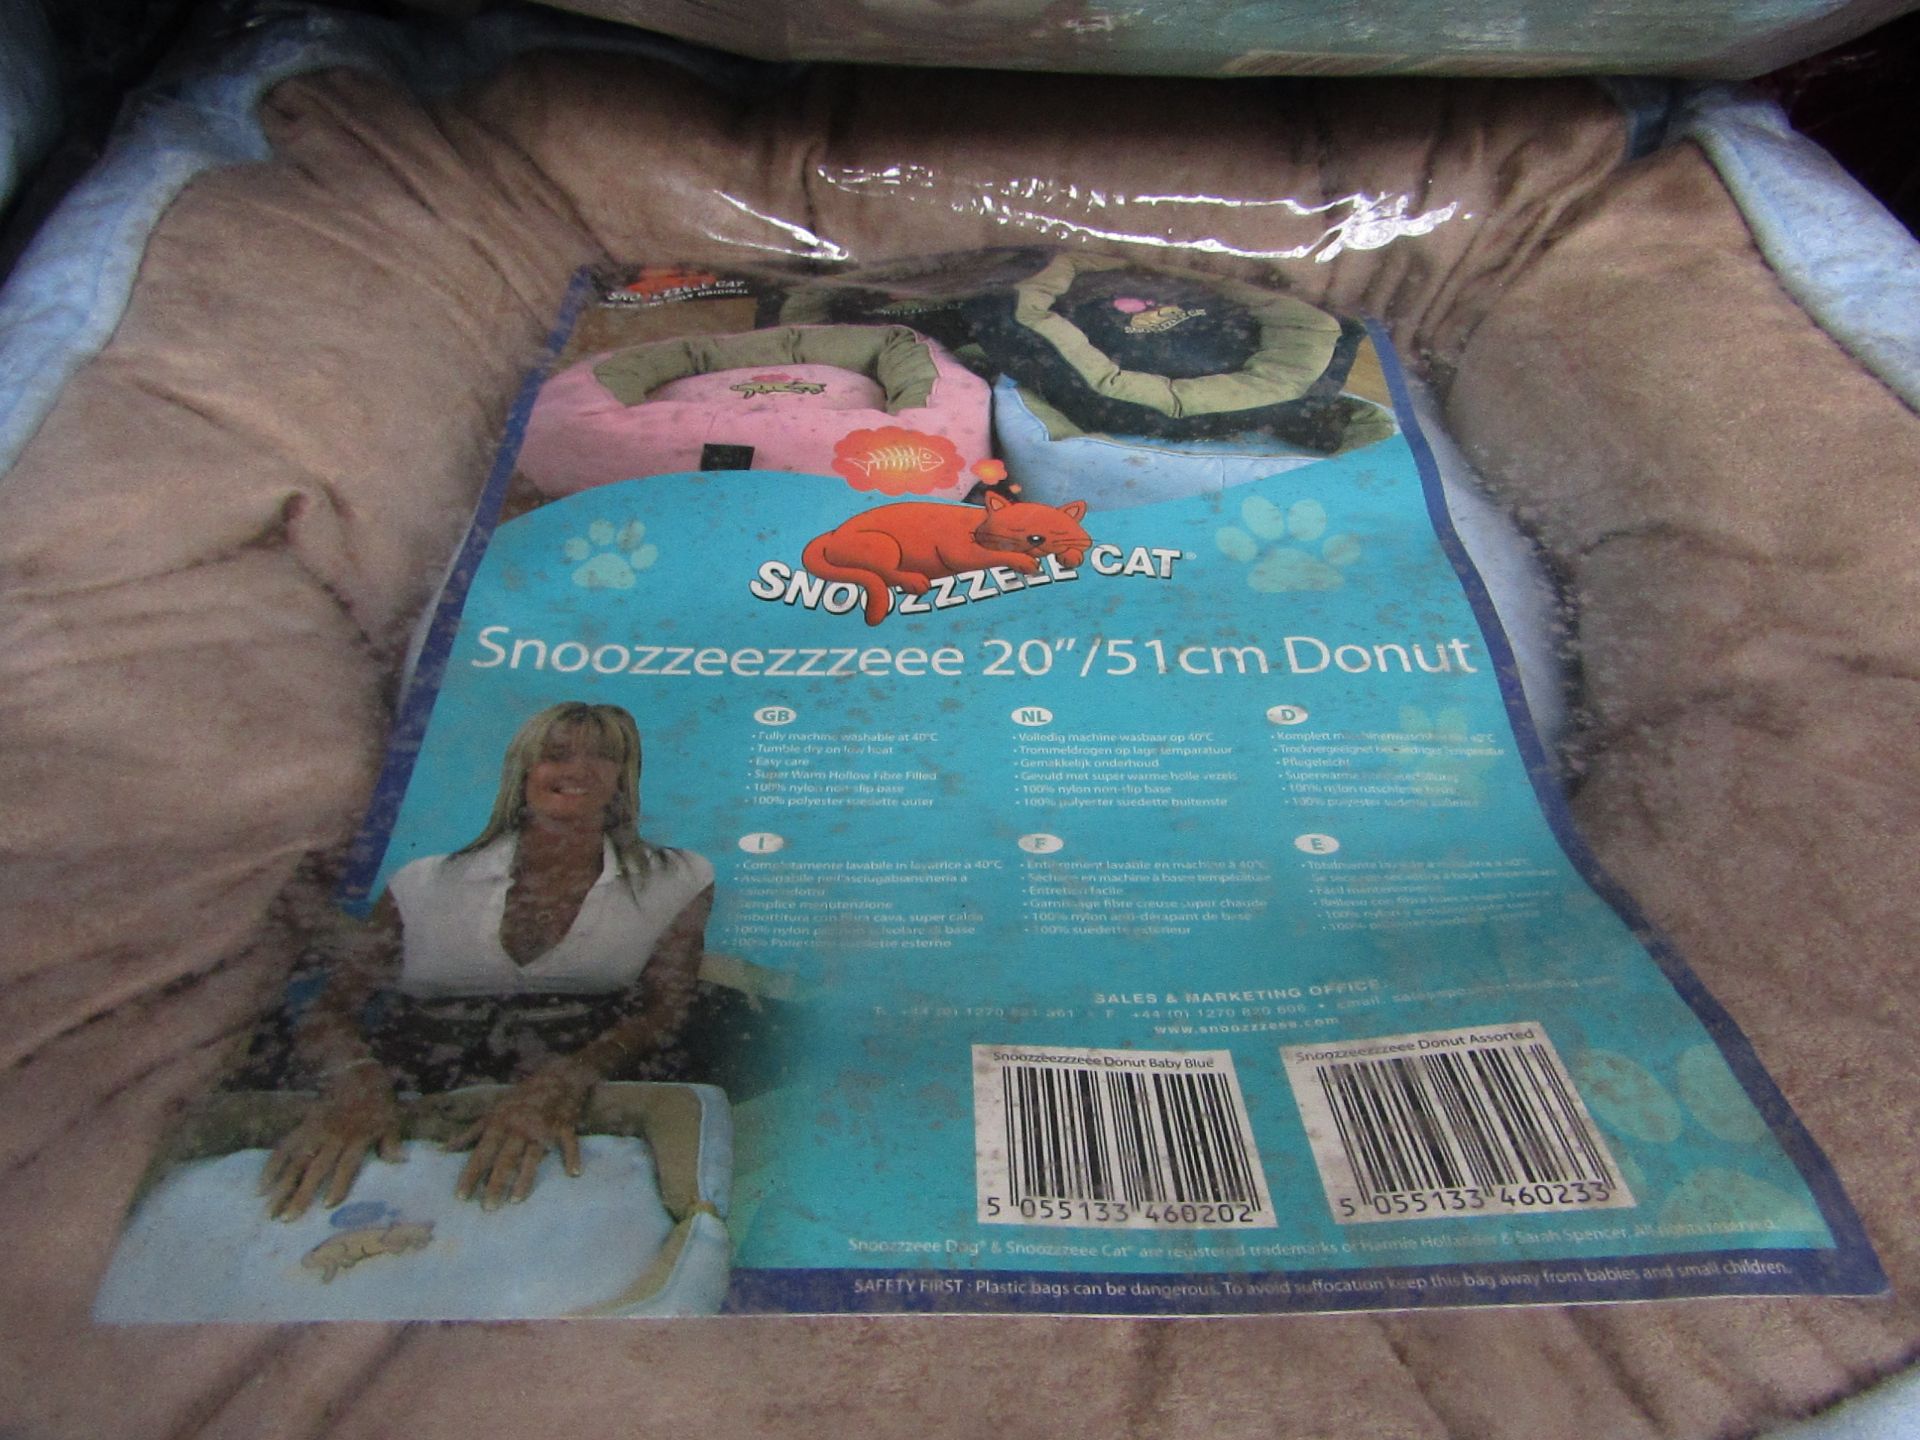 6x Snoozzzeee Cat - Baby Blue Donut Cat Bed - (20"/51cm) - All New & Packaged.